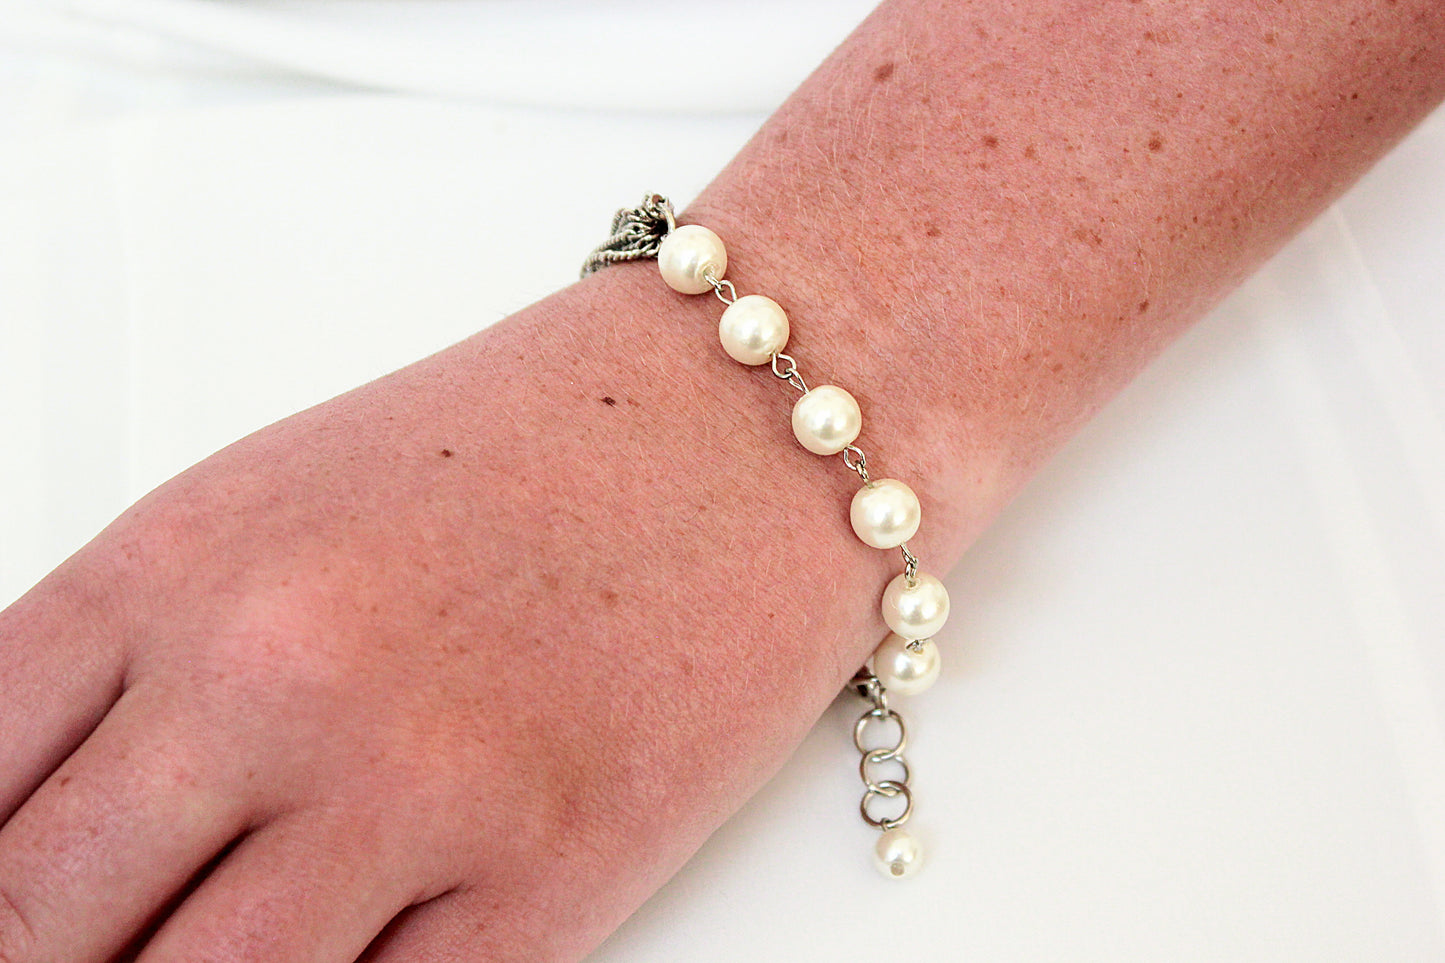 Pearl Bracelet Silver Chain Bracelet Pearl Beaded Bracelets Dainty Charm Bracelet Minimalist Wedding Jewelry Simple Bridesmaid Gift, KAI  BRACELET for Her, for Bride, for Bridesmaid Gift , for Mother of the Bride, for Wedding Guest or Special Occasion by Camilla Christine Bridal Jewelry and Wedding Accessories. Bridal Style Inspiration Trends for Bride, Wedding Ideas